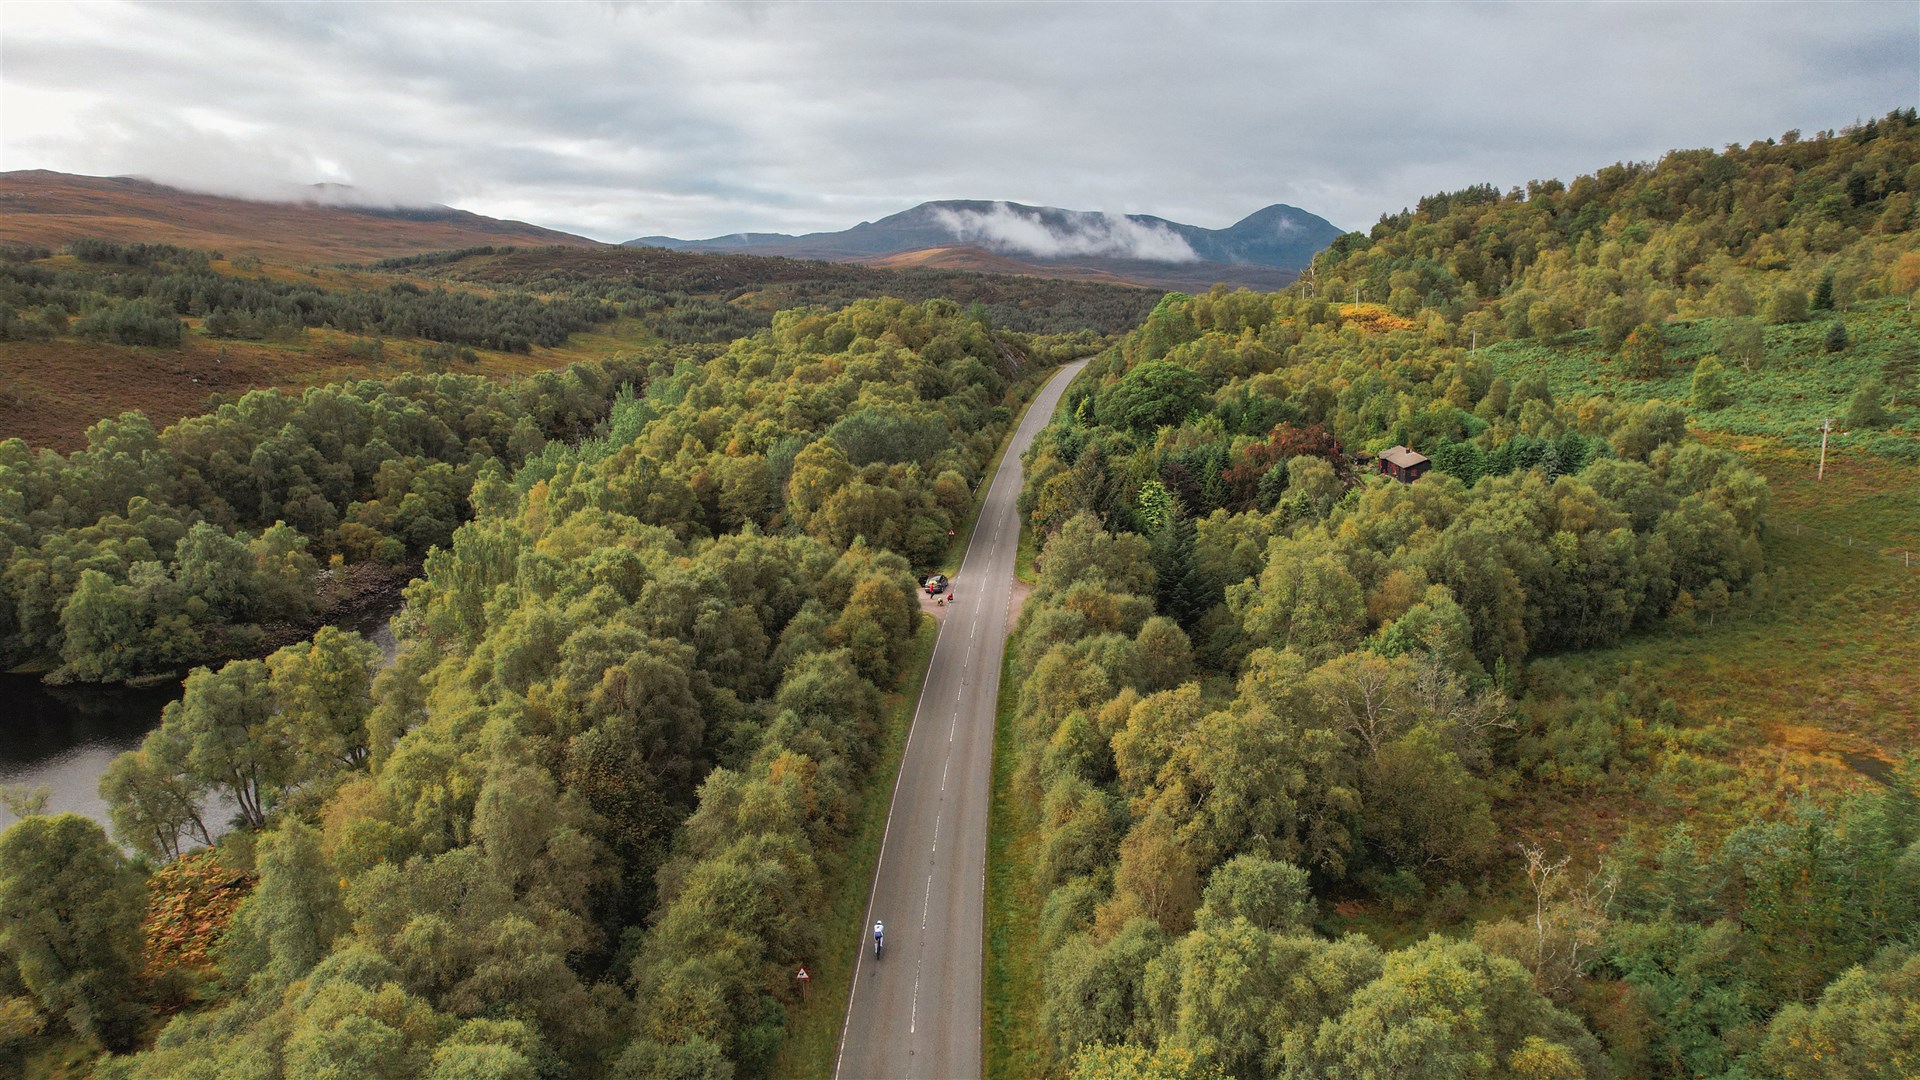 An aerial view shows the beautiful scenery NC500 record hopeful Mark Beaumont is cycling through.